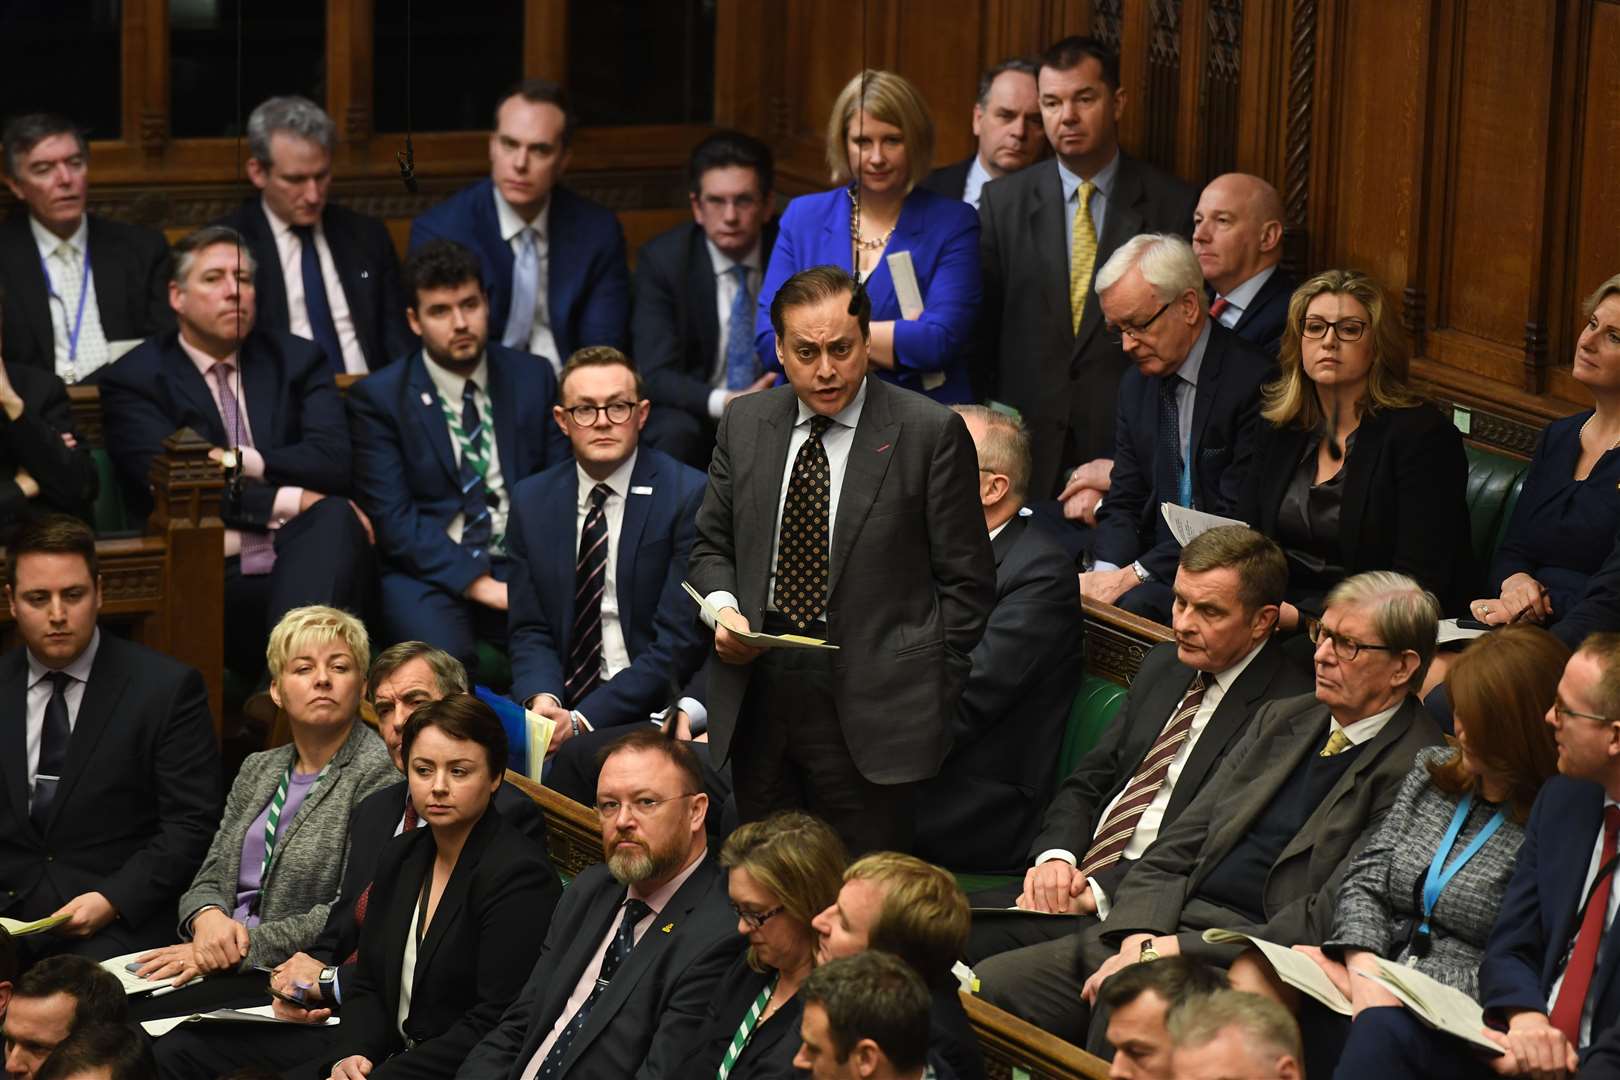 Imran Ahmad Khan has been suspended by the Tories (UK Parliament/PA)